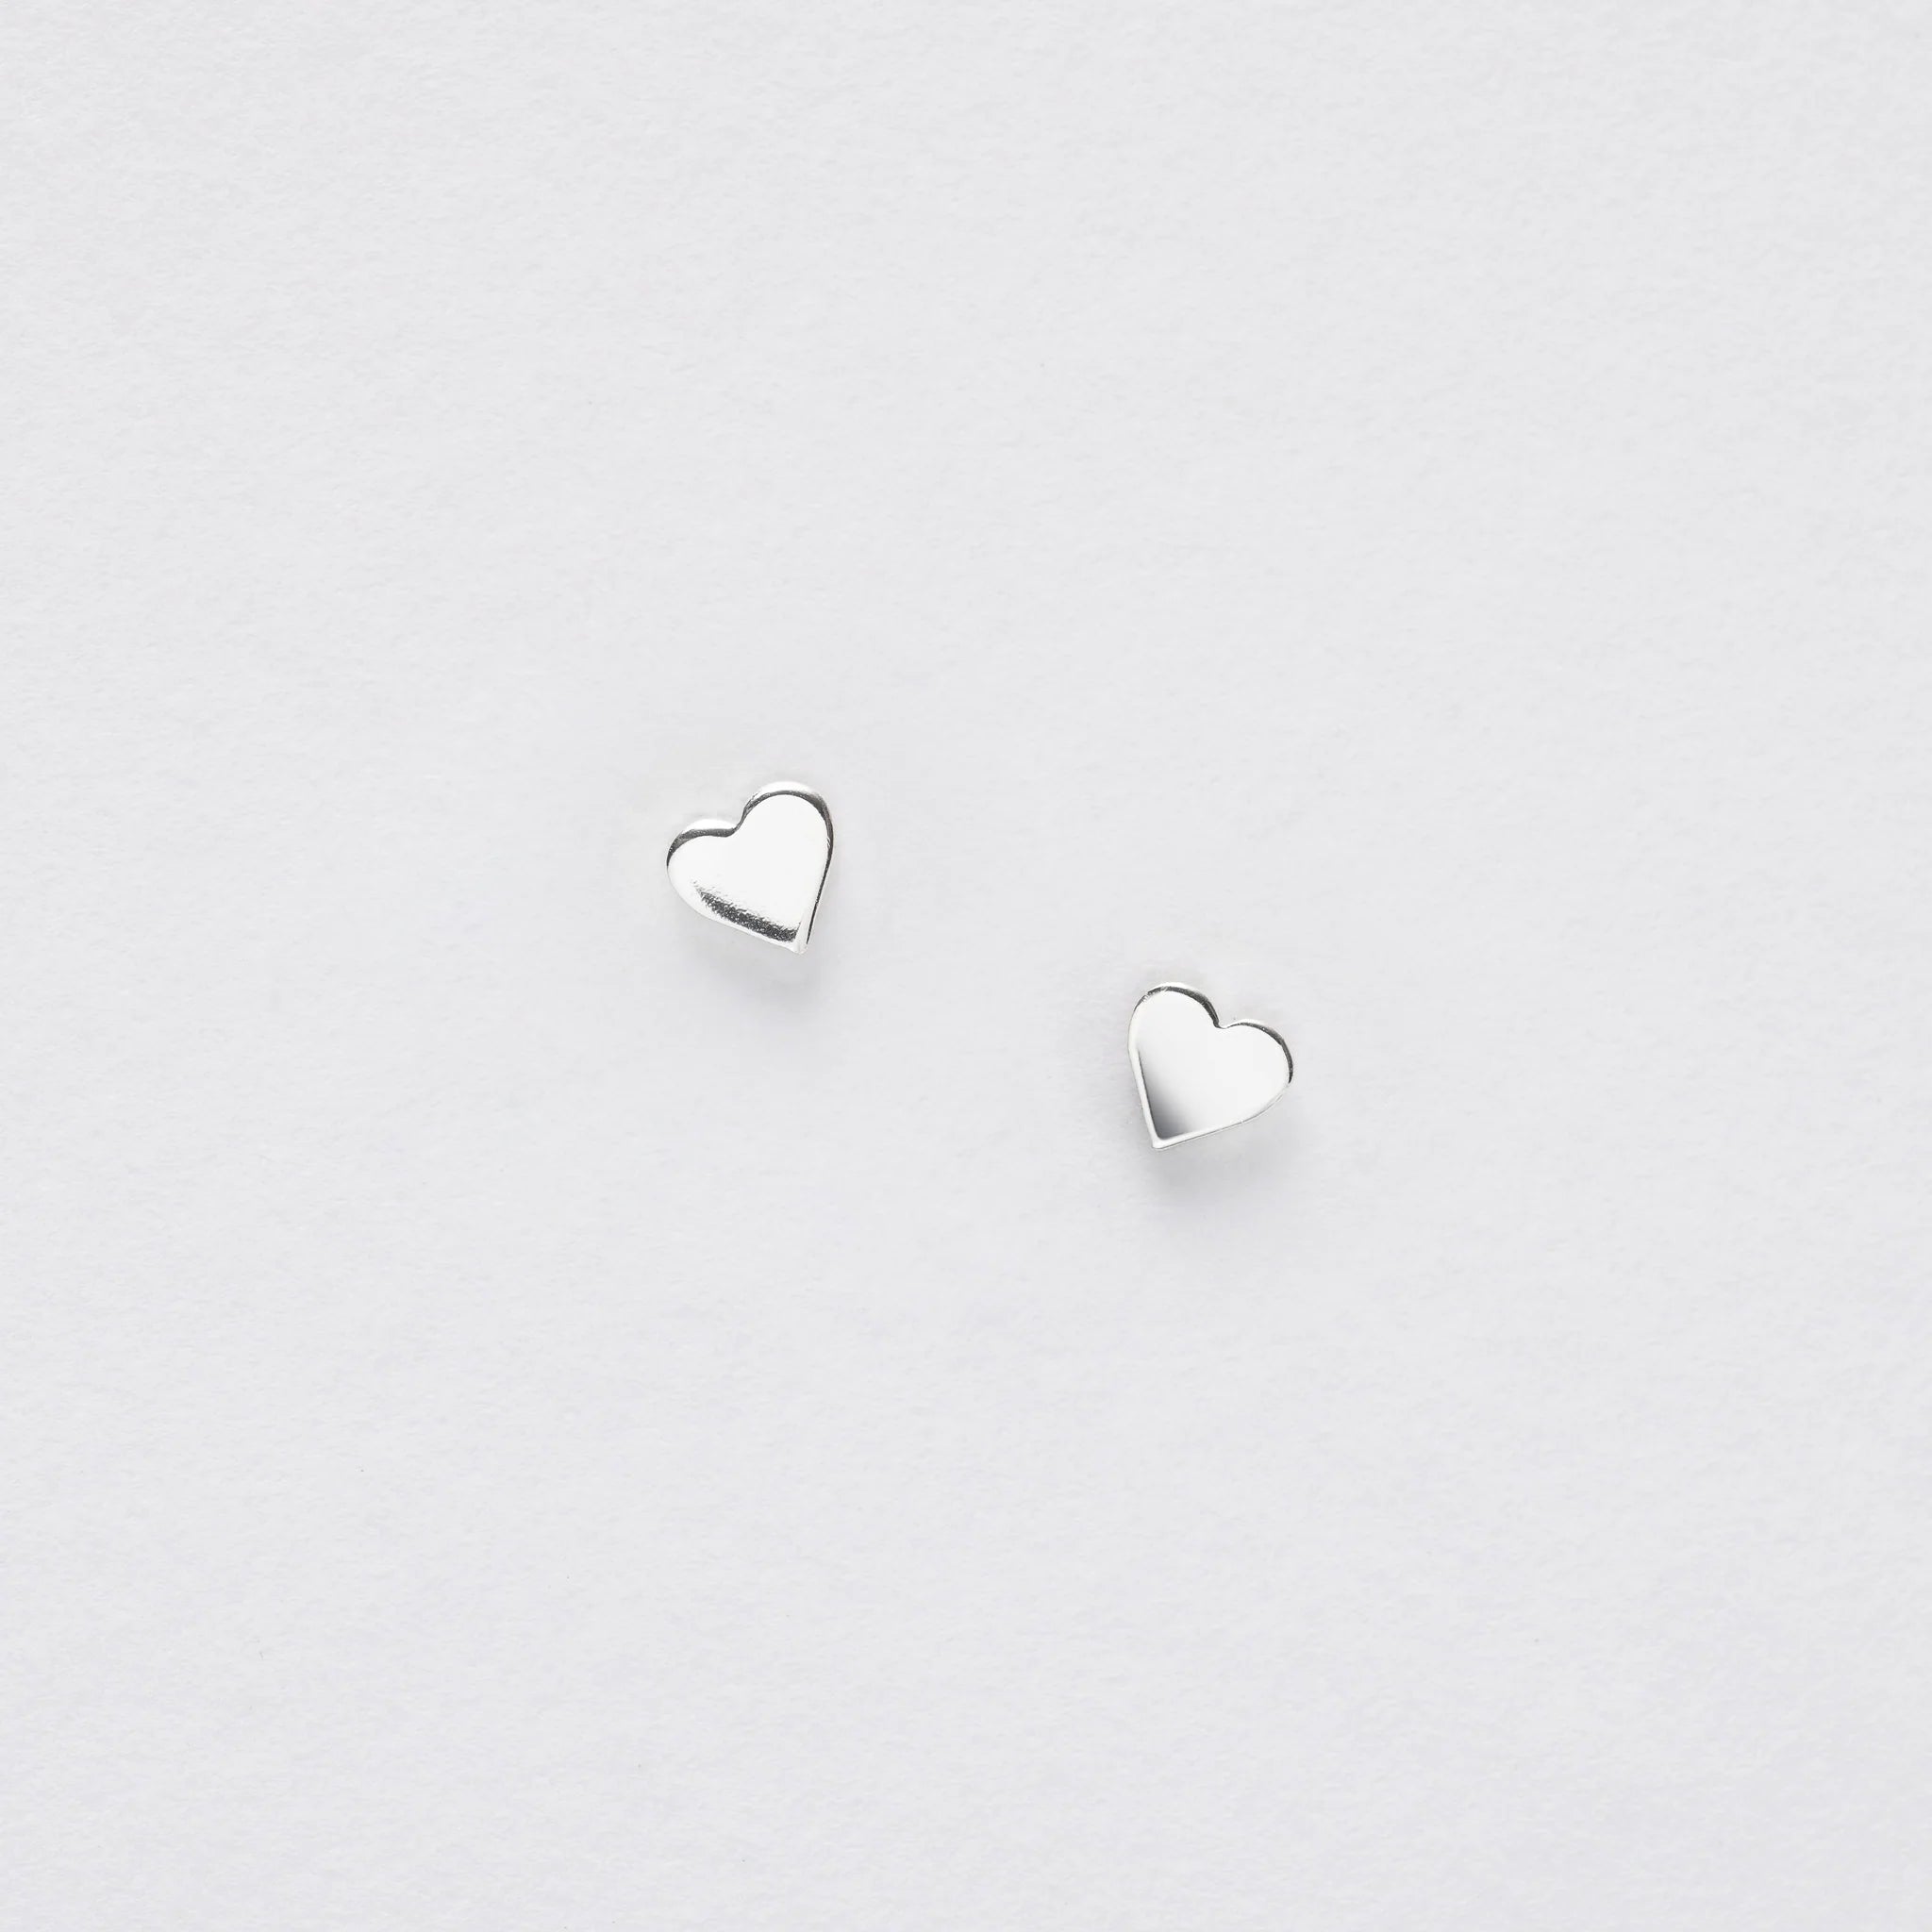 Crumble & Core | With Love Card with Earrings in a White Box by Weirs of Baggot St